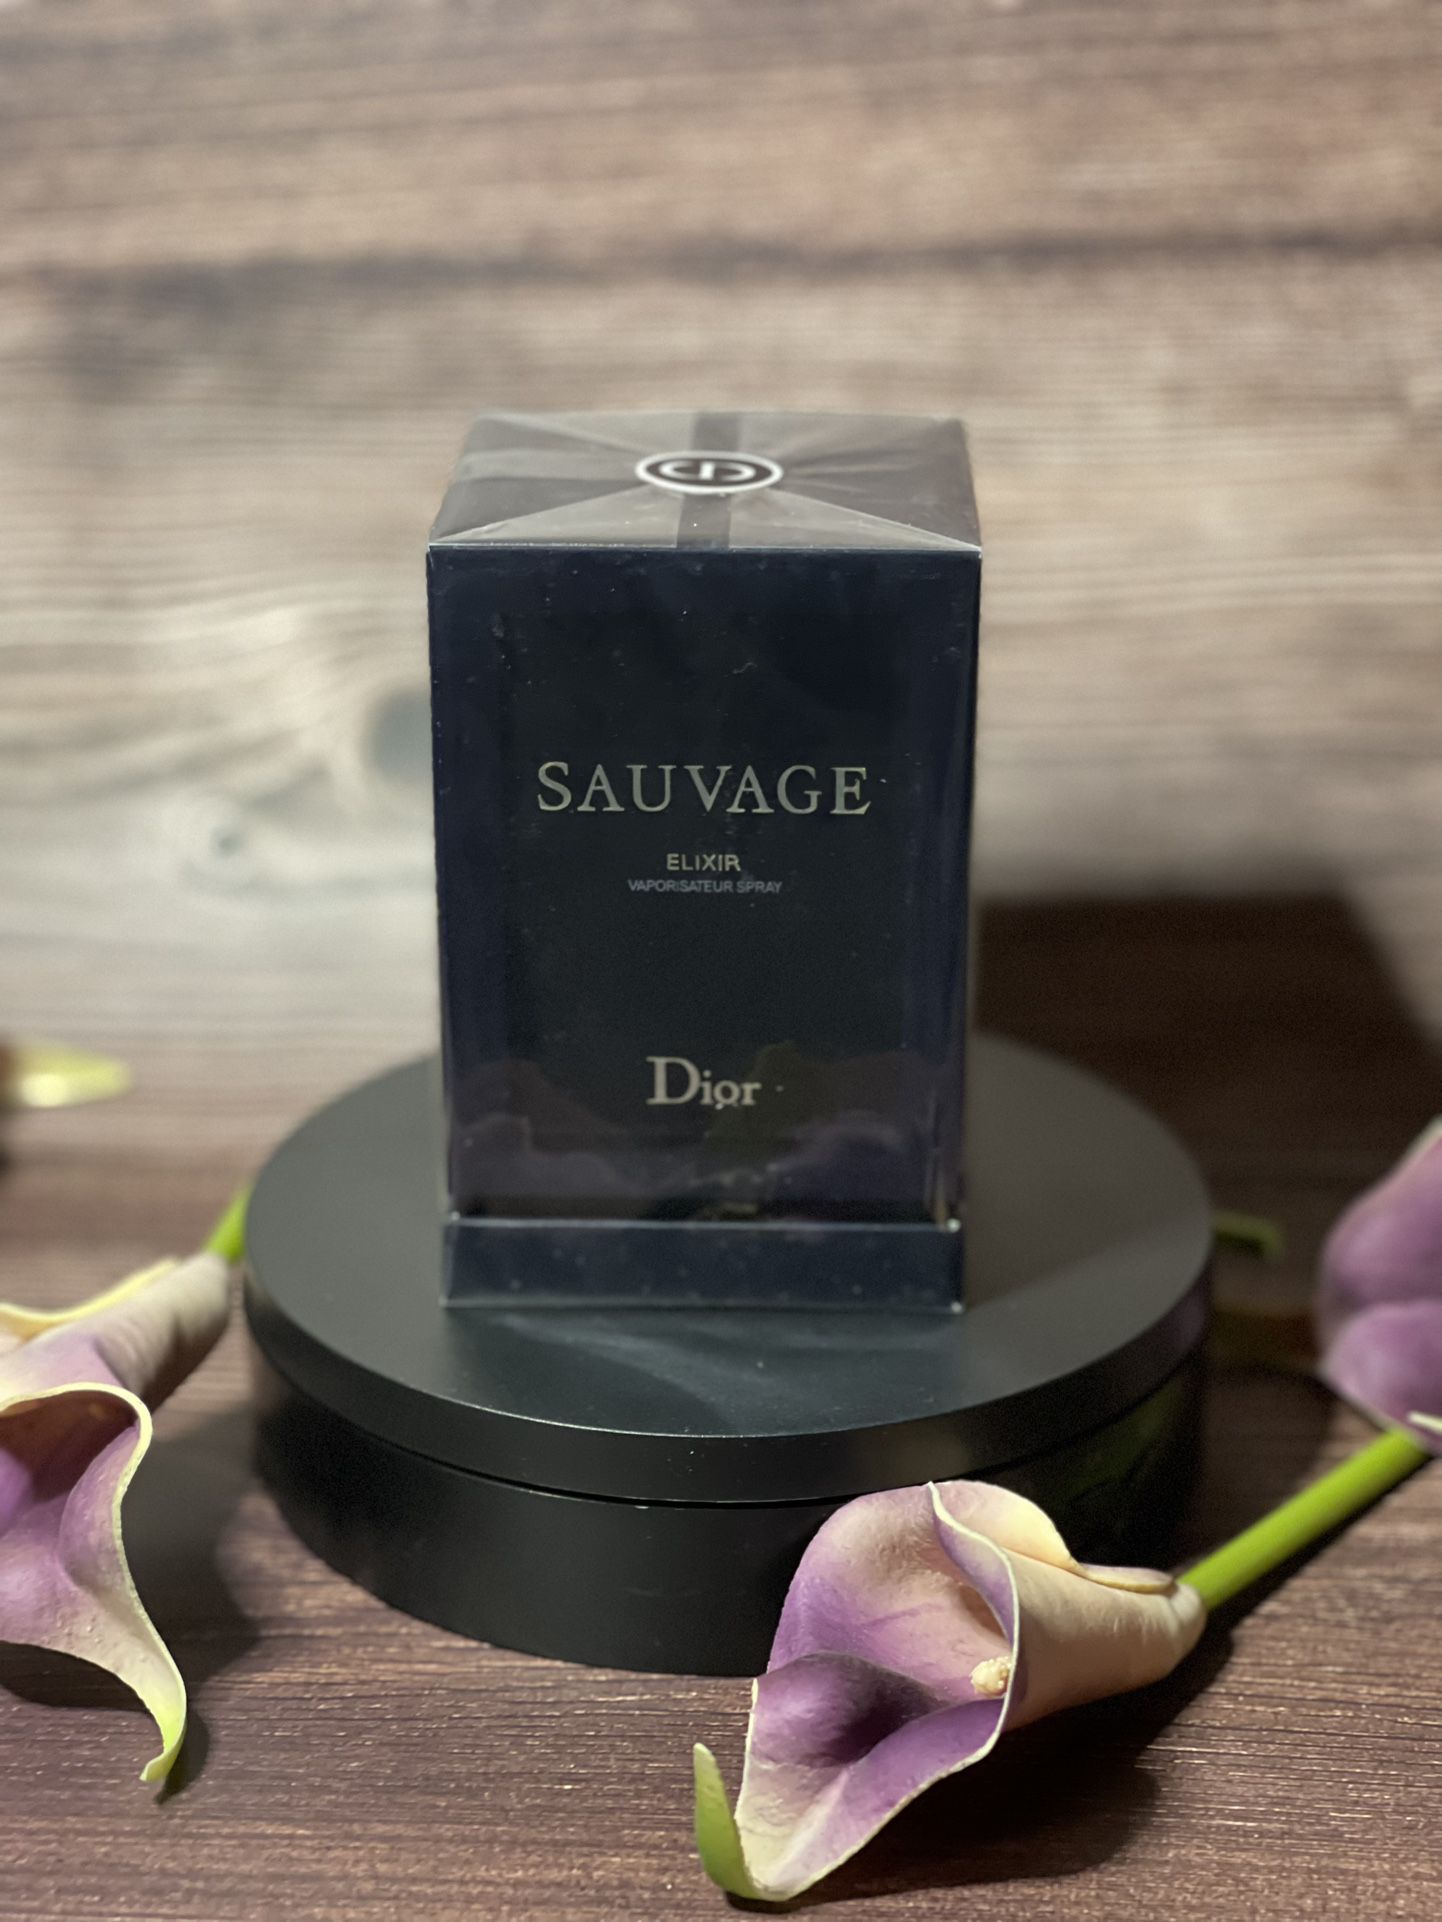 SAUVAGE Elixir By Dior